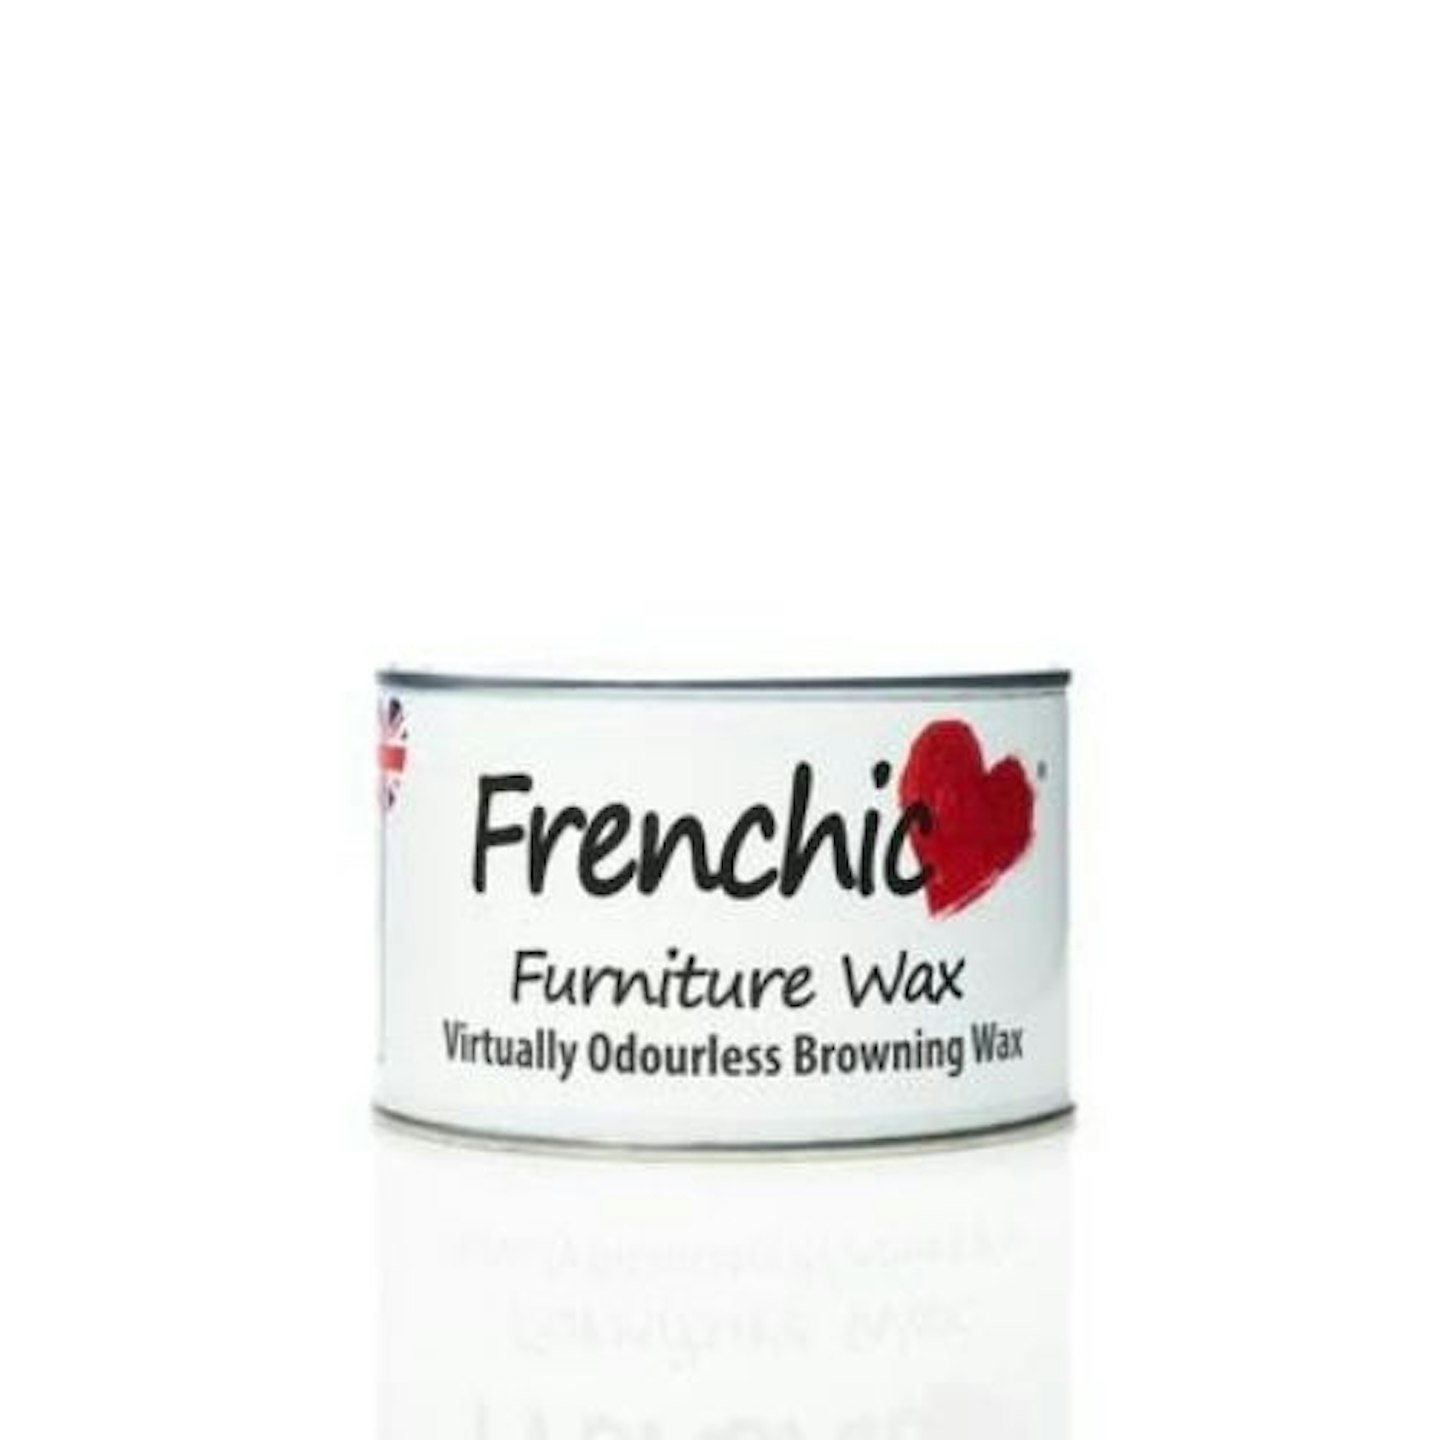 Frenchchic Browning Wax